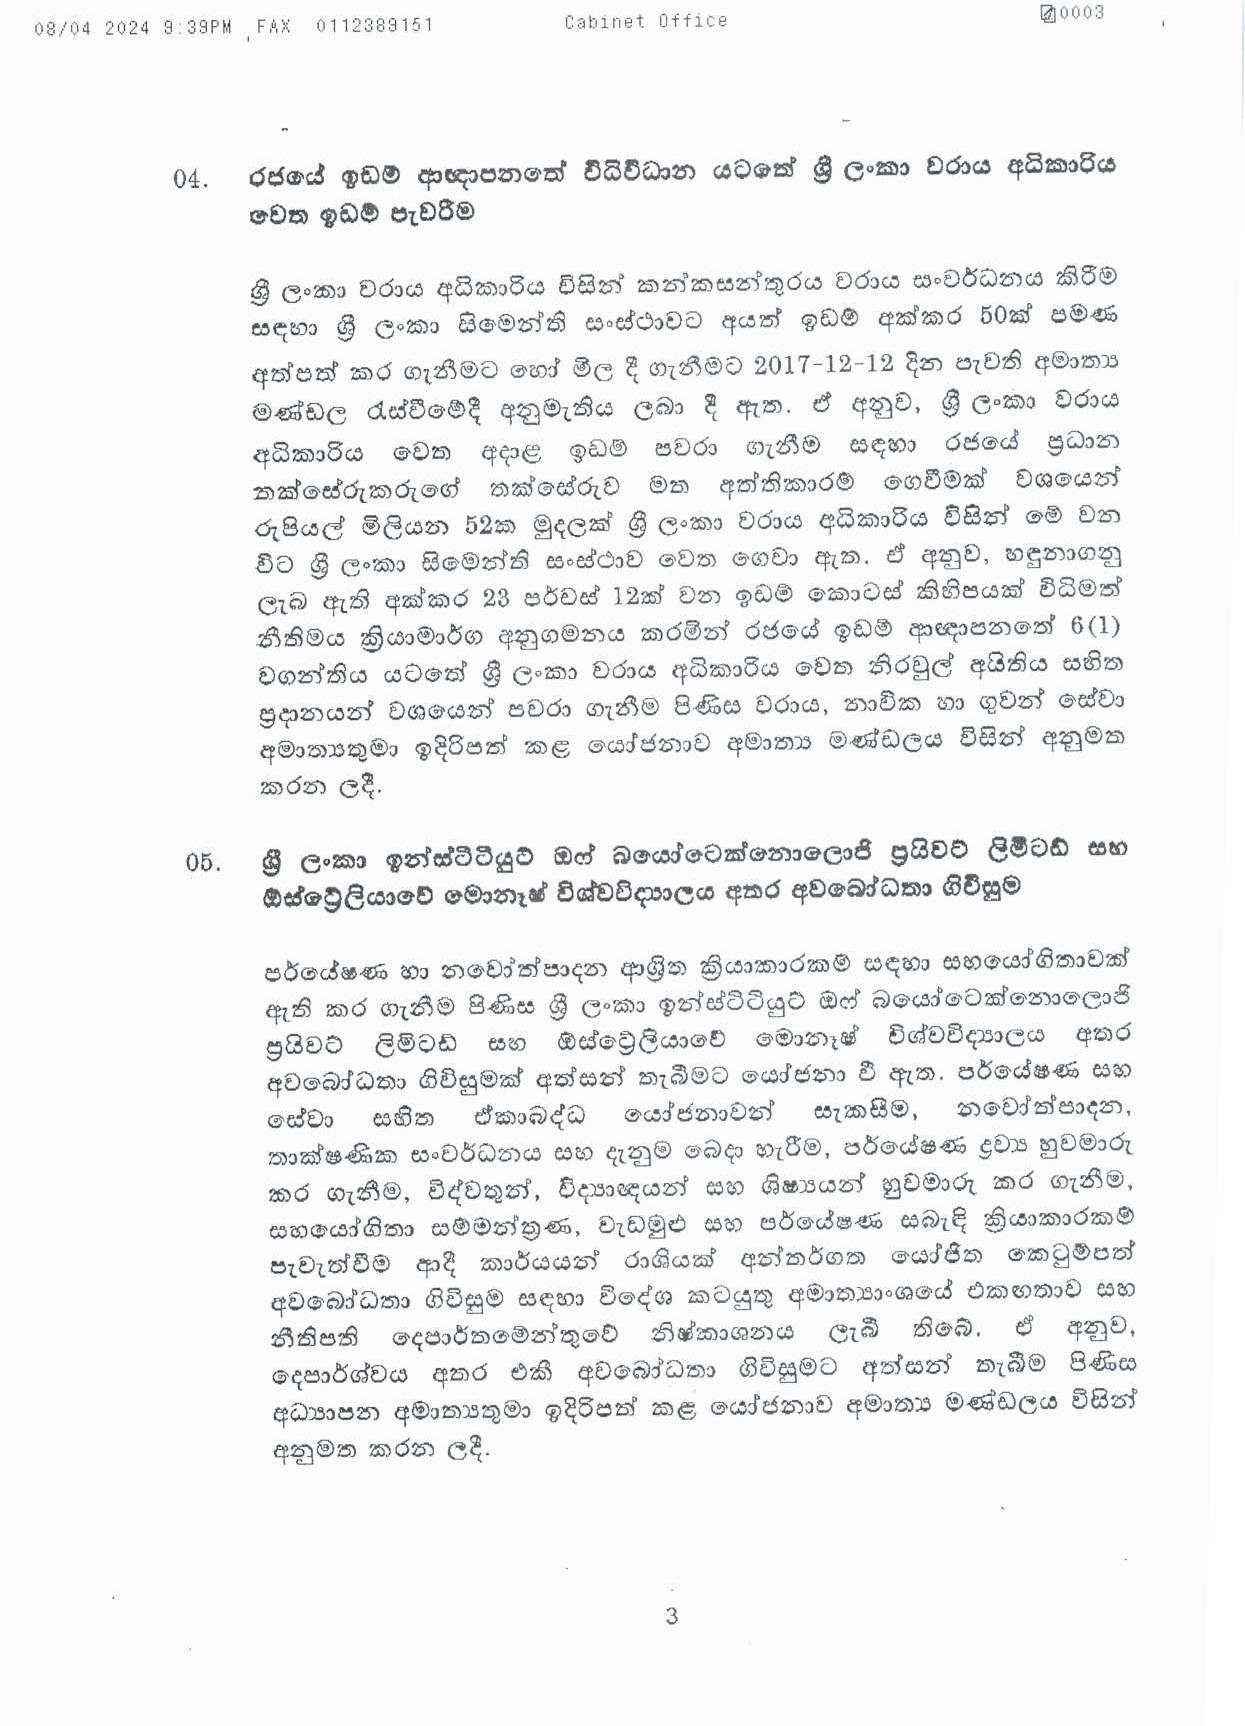 Cabinet Decision on 08.04.2024 page 003